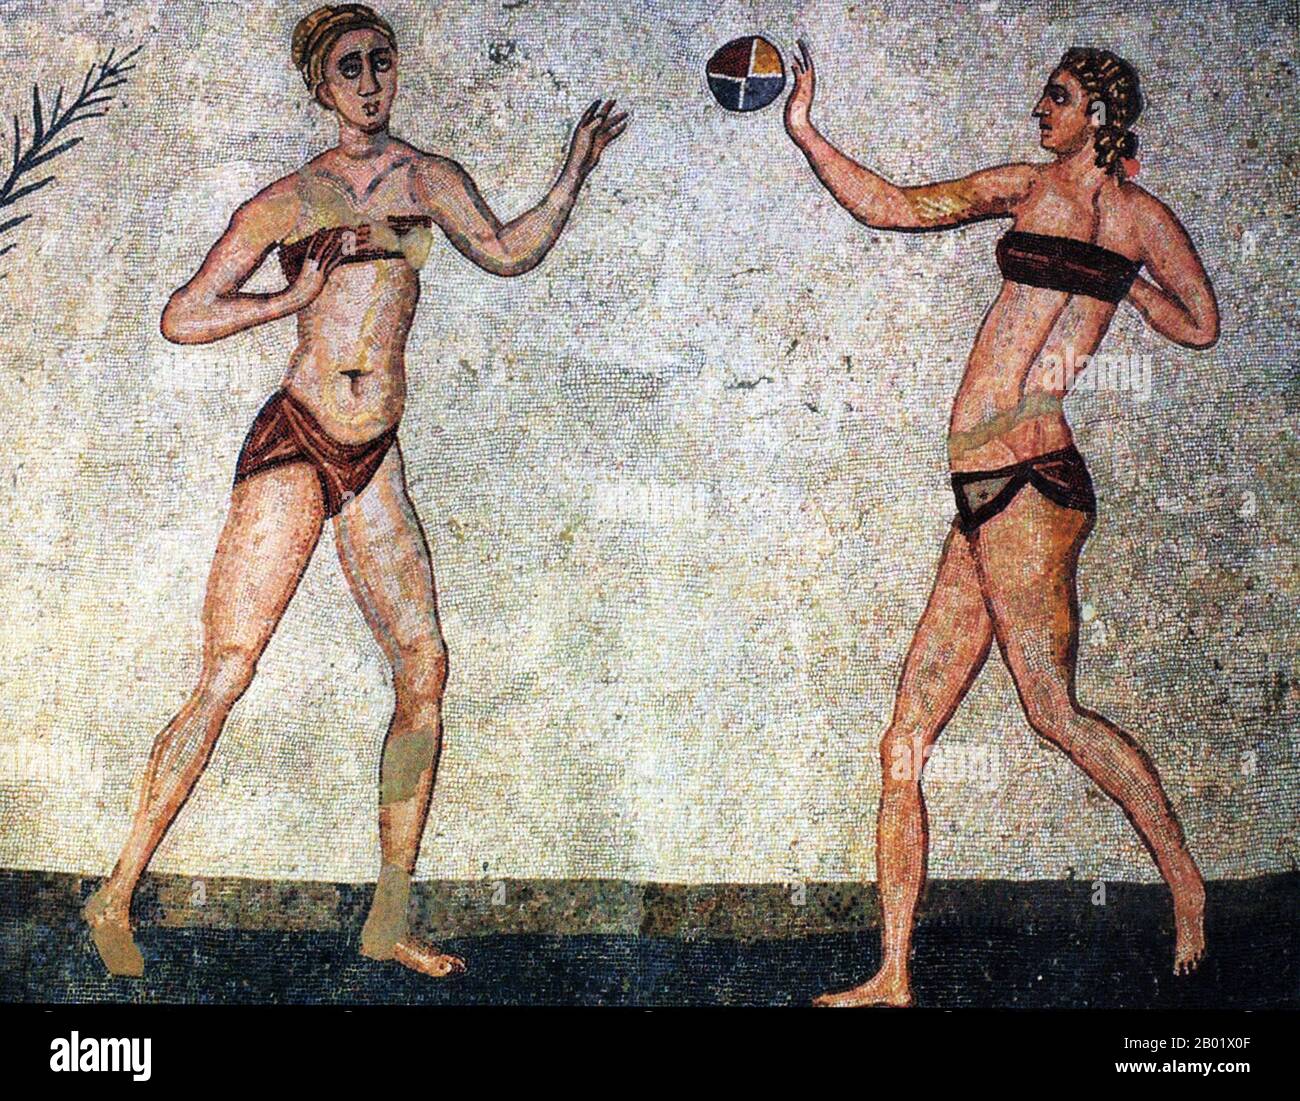 Italy: Roman women playing with a ball in a mosaic at Villa Romana del Casale. One of the so-called 'Bikini Mosaics', 4th century CE.  Villa Romana del Casale (Sicilian: Villa Rumana dû Casali) is a Roman villa built in the first quarter of the 4th century CE and located about 5 km outside the town of Piazza Armerina, Sicily, southern Italy. Containing the richest, largest and most complex collection of Roman mosaics in the world, it is one of 44 UNESCO World Heritage Sites in Italy. Stock Photo